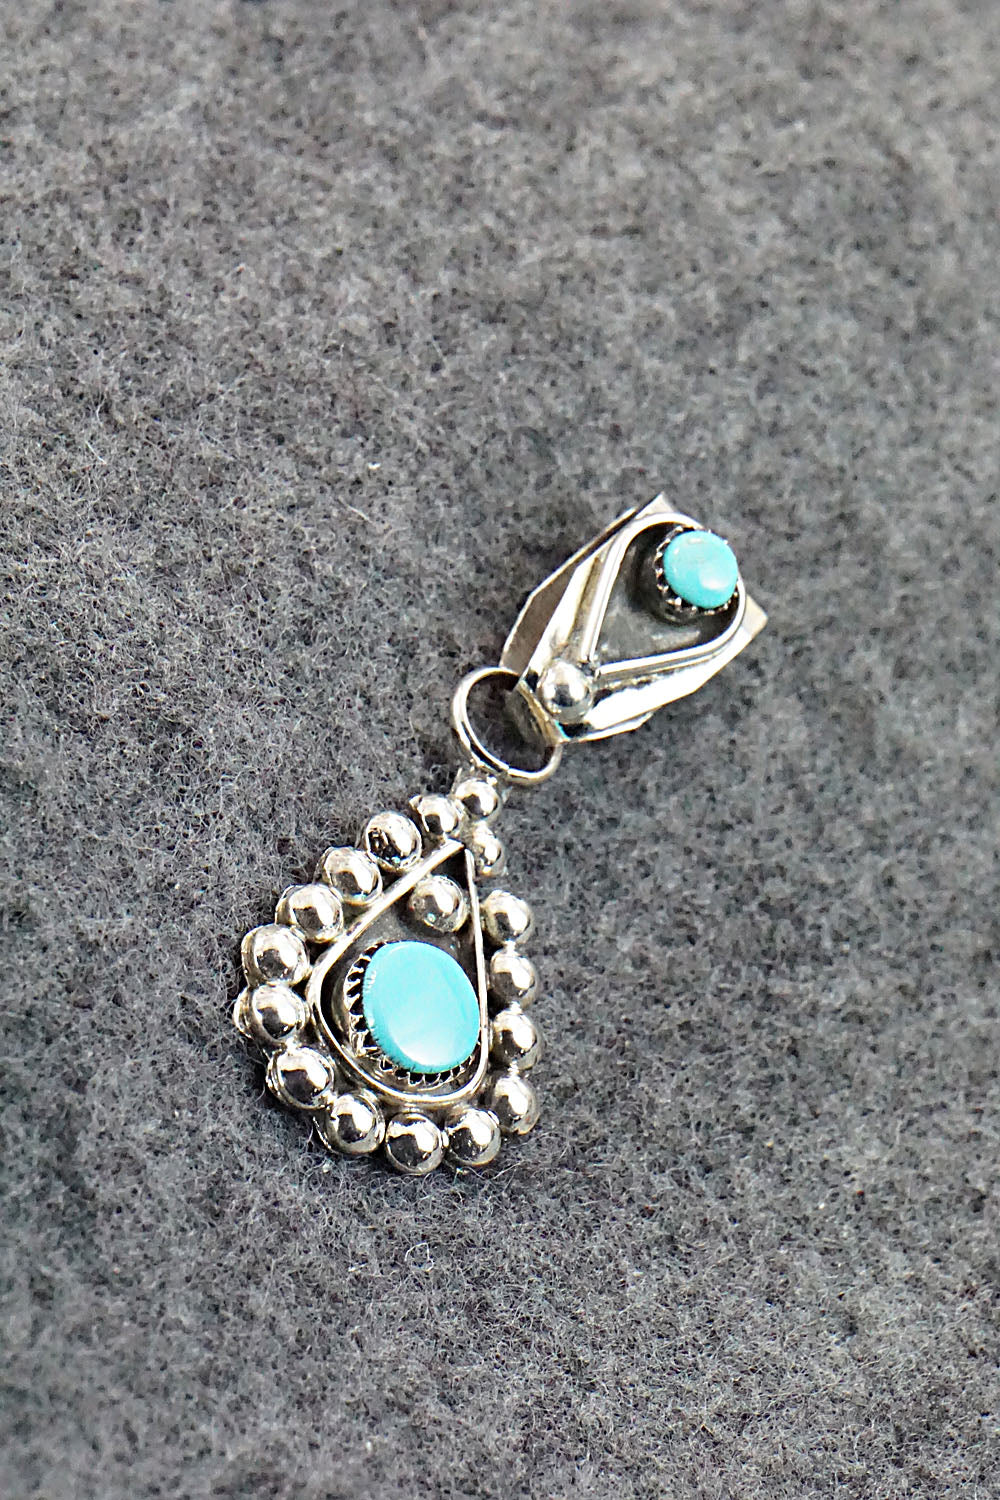 Turquoise and Sterling Silver Pendant - Verdie Booqua